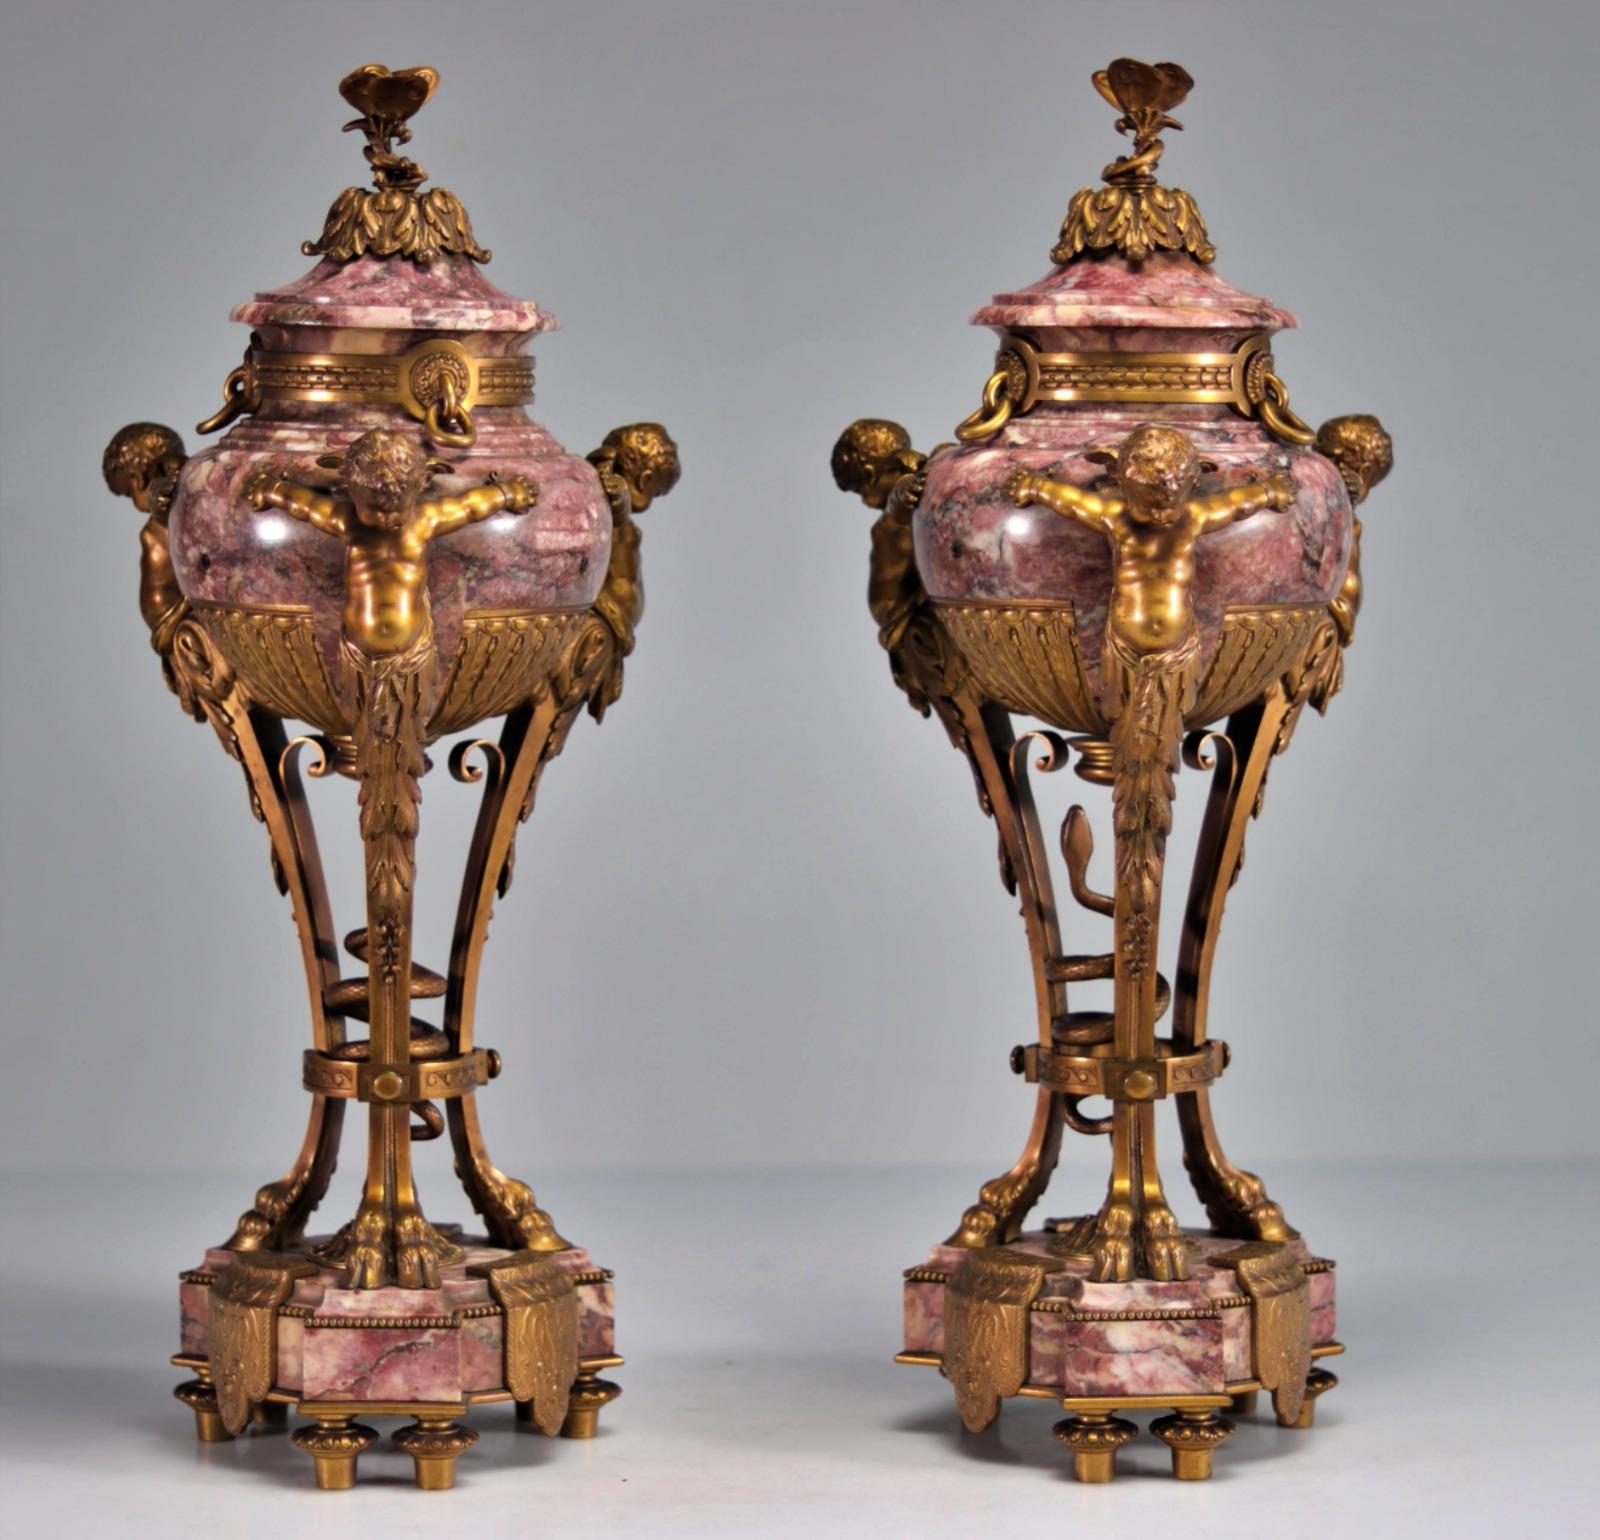 Rare pair of marble and gilt bronze Cassolettes 19th century
decorated with angels
Weight: 24.20 kg
Sizes: H 55.0cm x D 23.0cm 
very good condition.